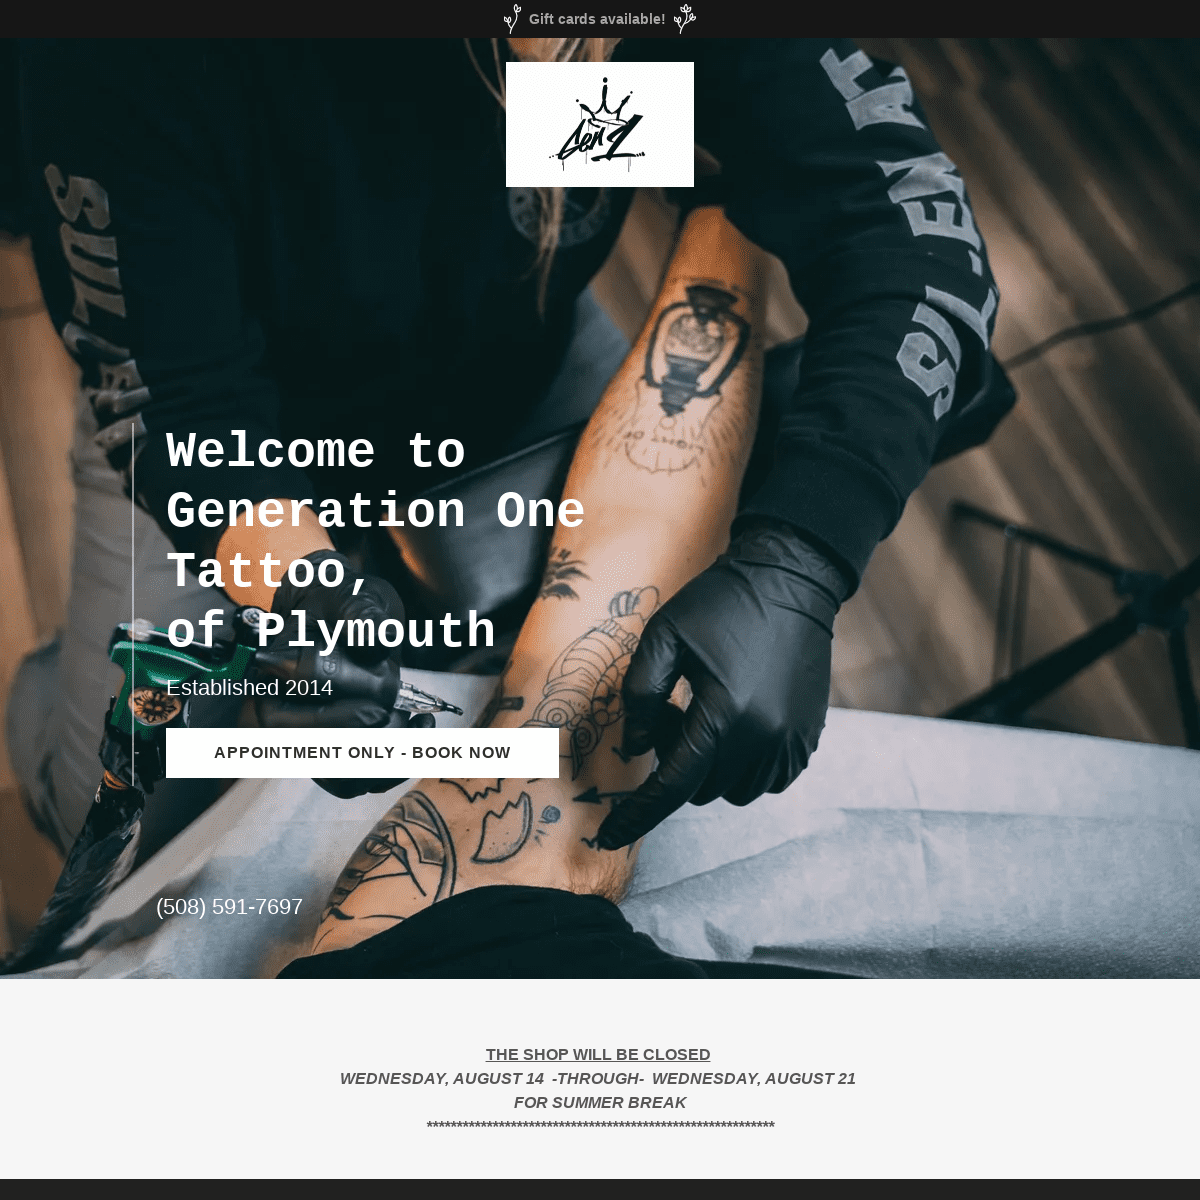 Generation One Tattoo, Plymouth - Body Art, Tattooing